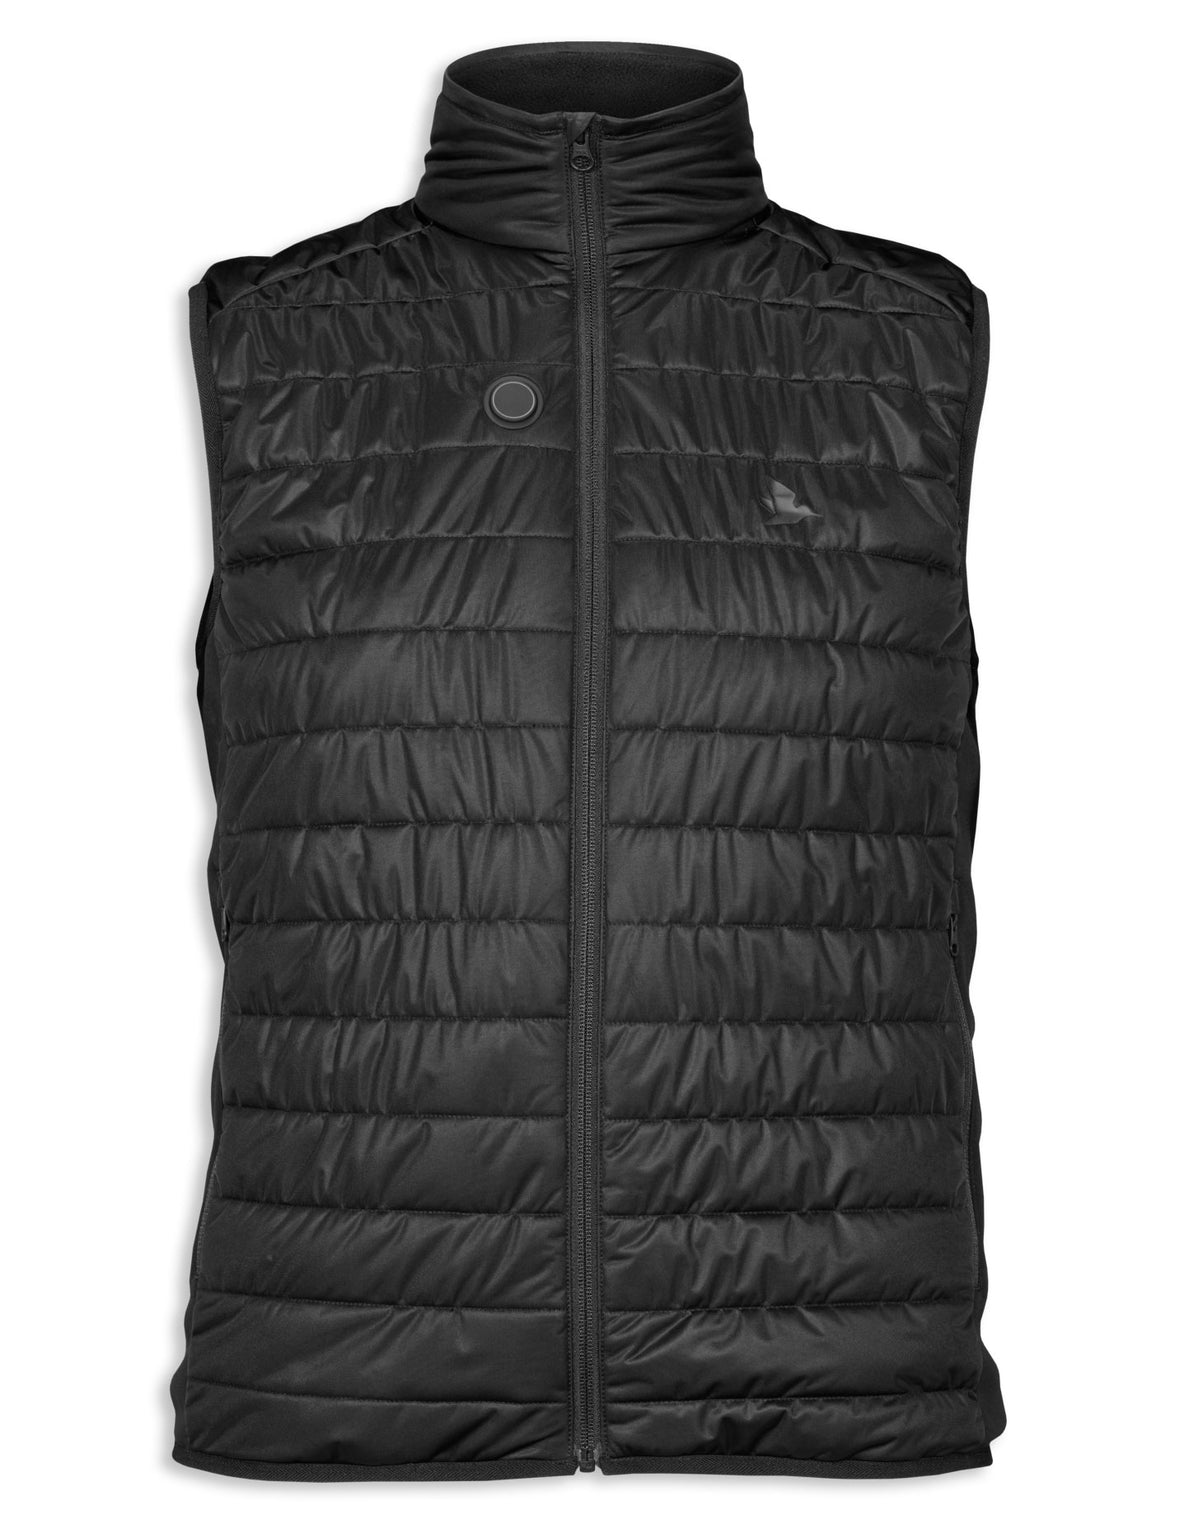 Seeland Heat Quilted Waistcoat | Electric Heated Membrane